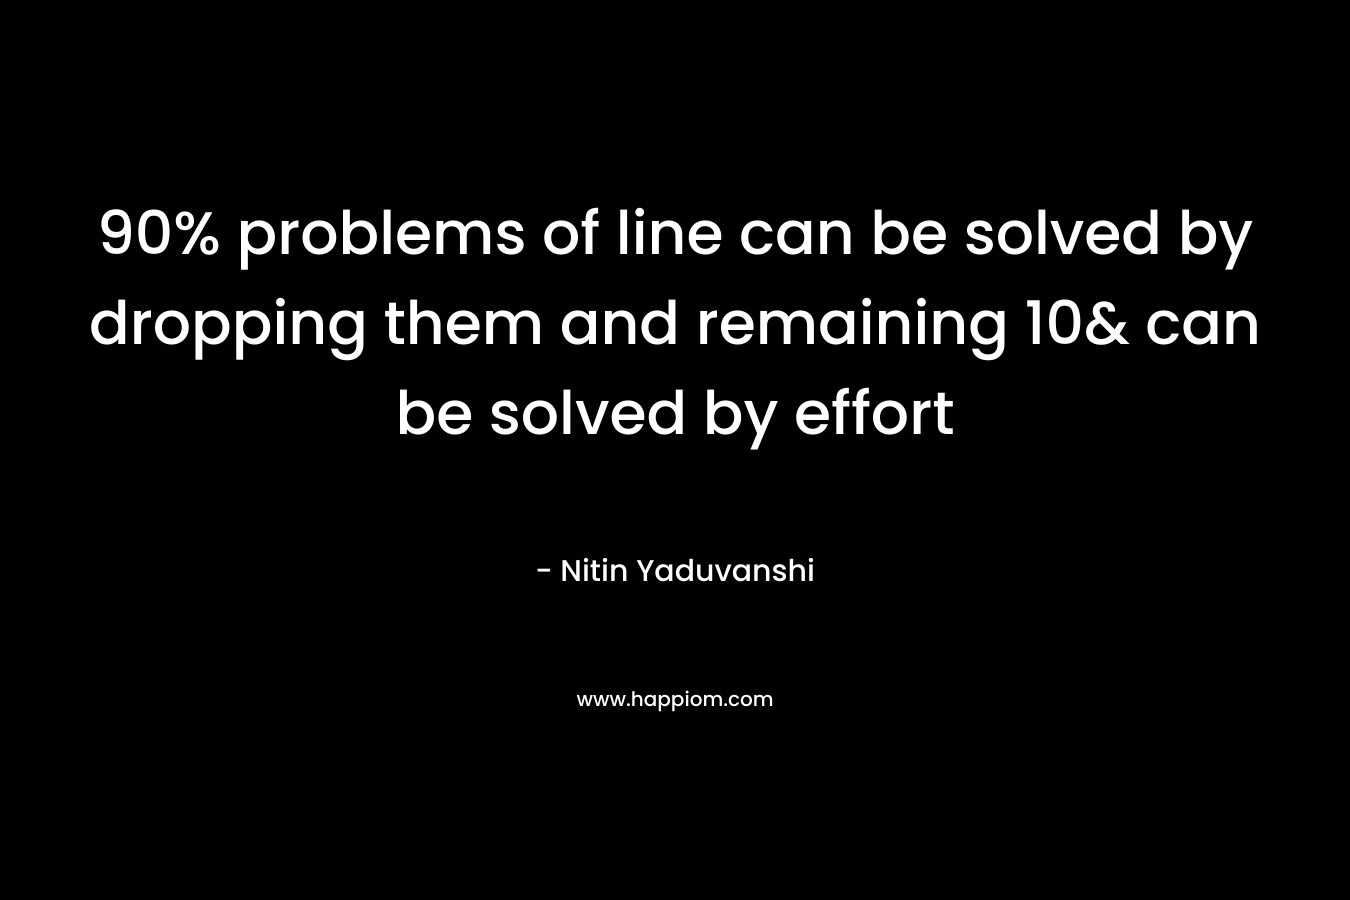 90% problems of line can be solved by dropping them and remaining 10& can be solved by effort